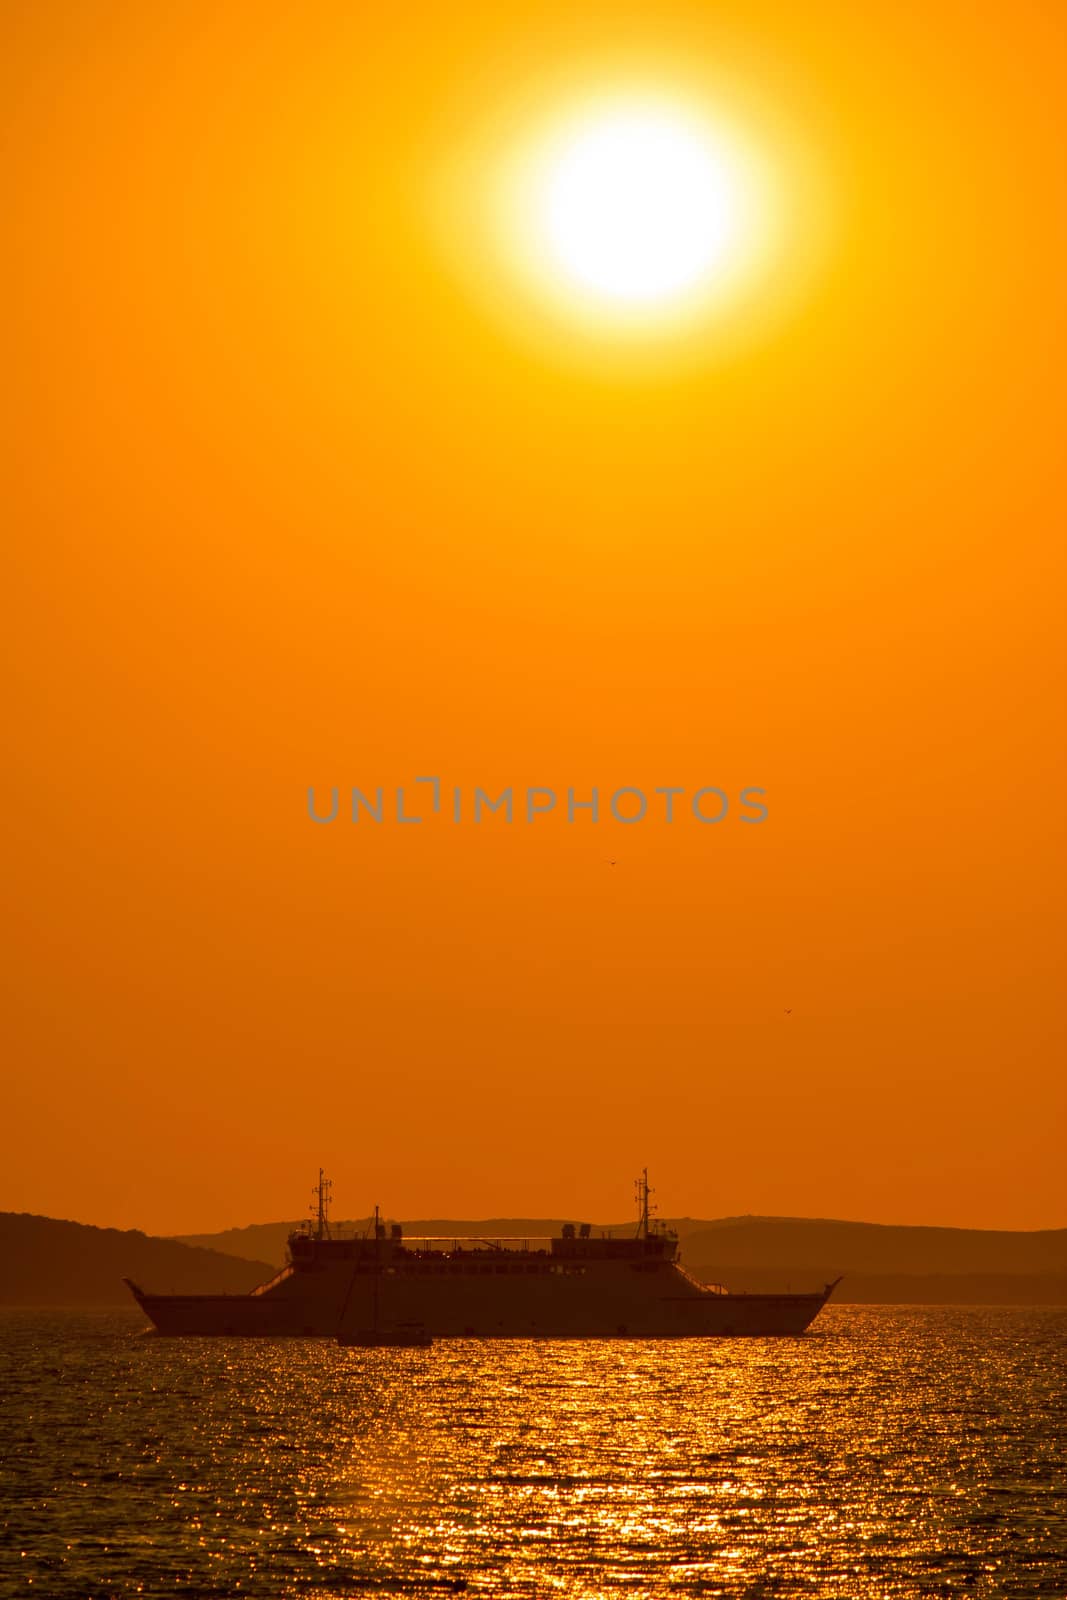 Ferry boat under sun vertical view by xbrchx